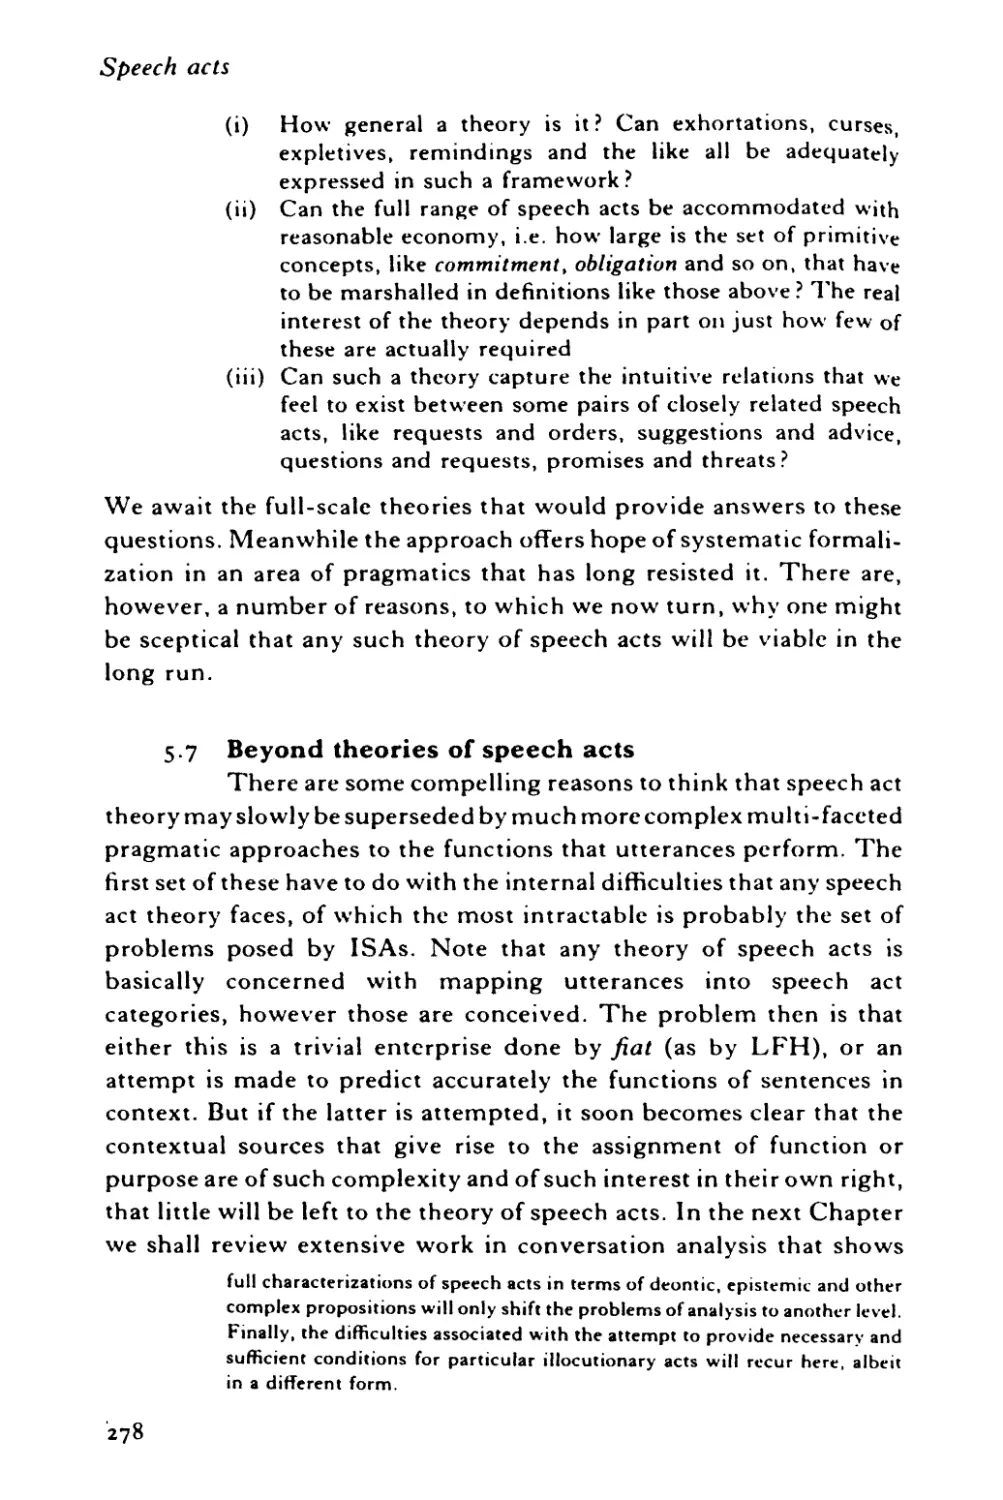 5.7 Beyond theories of speech acts